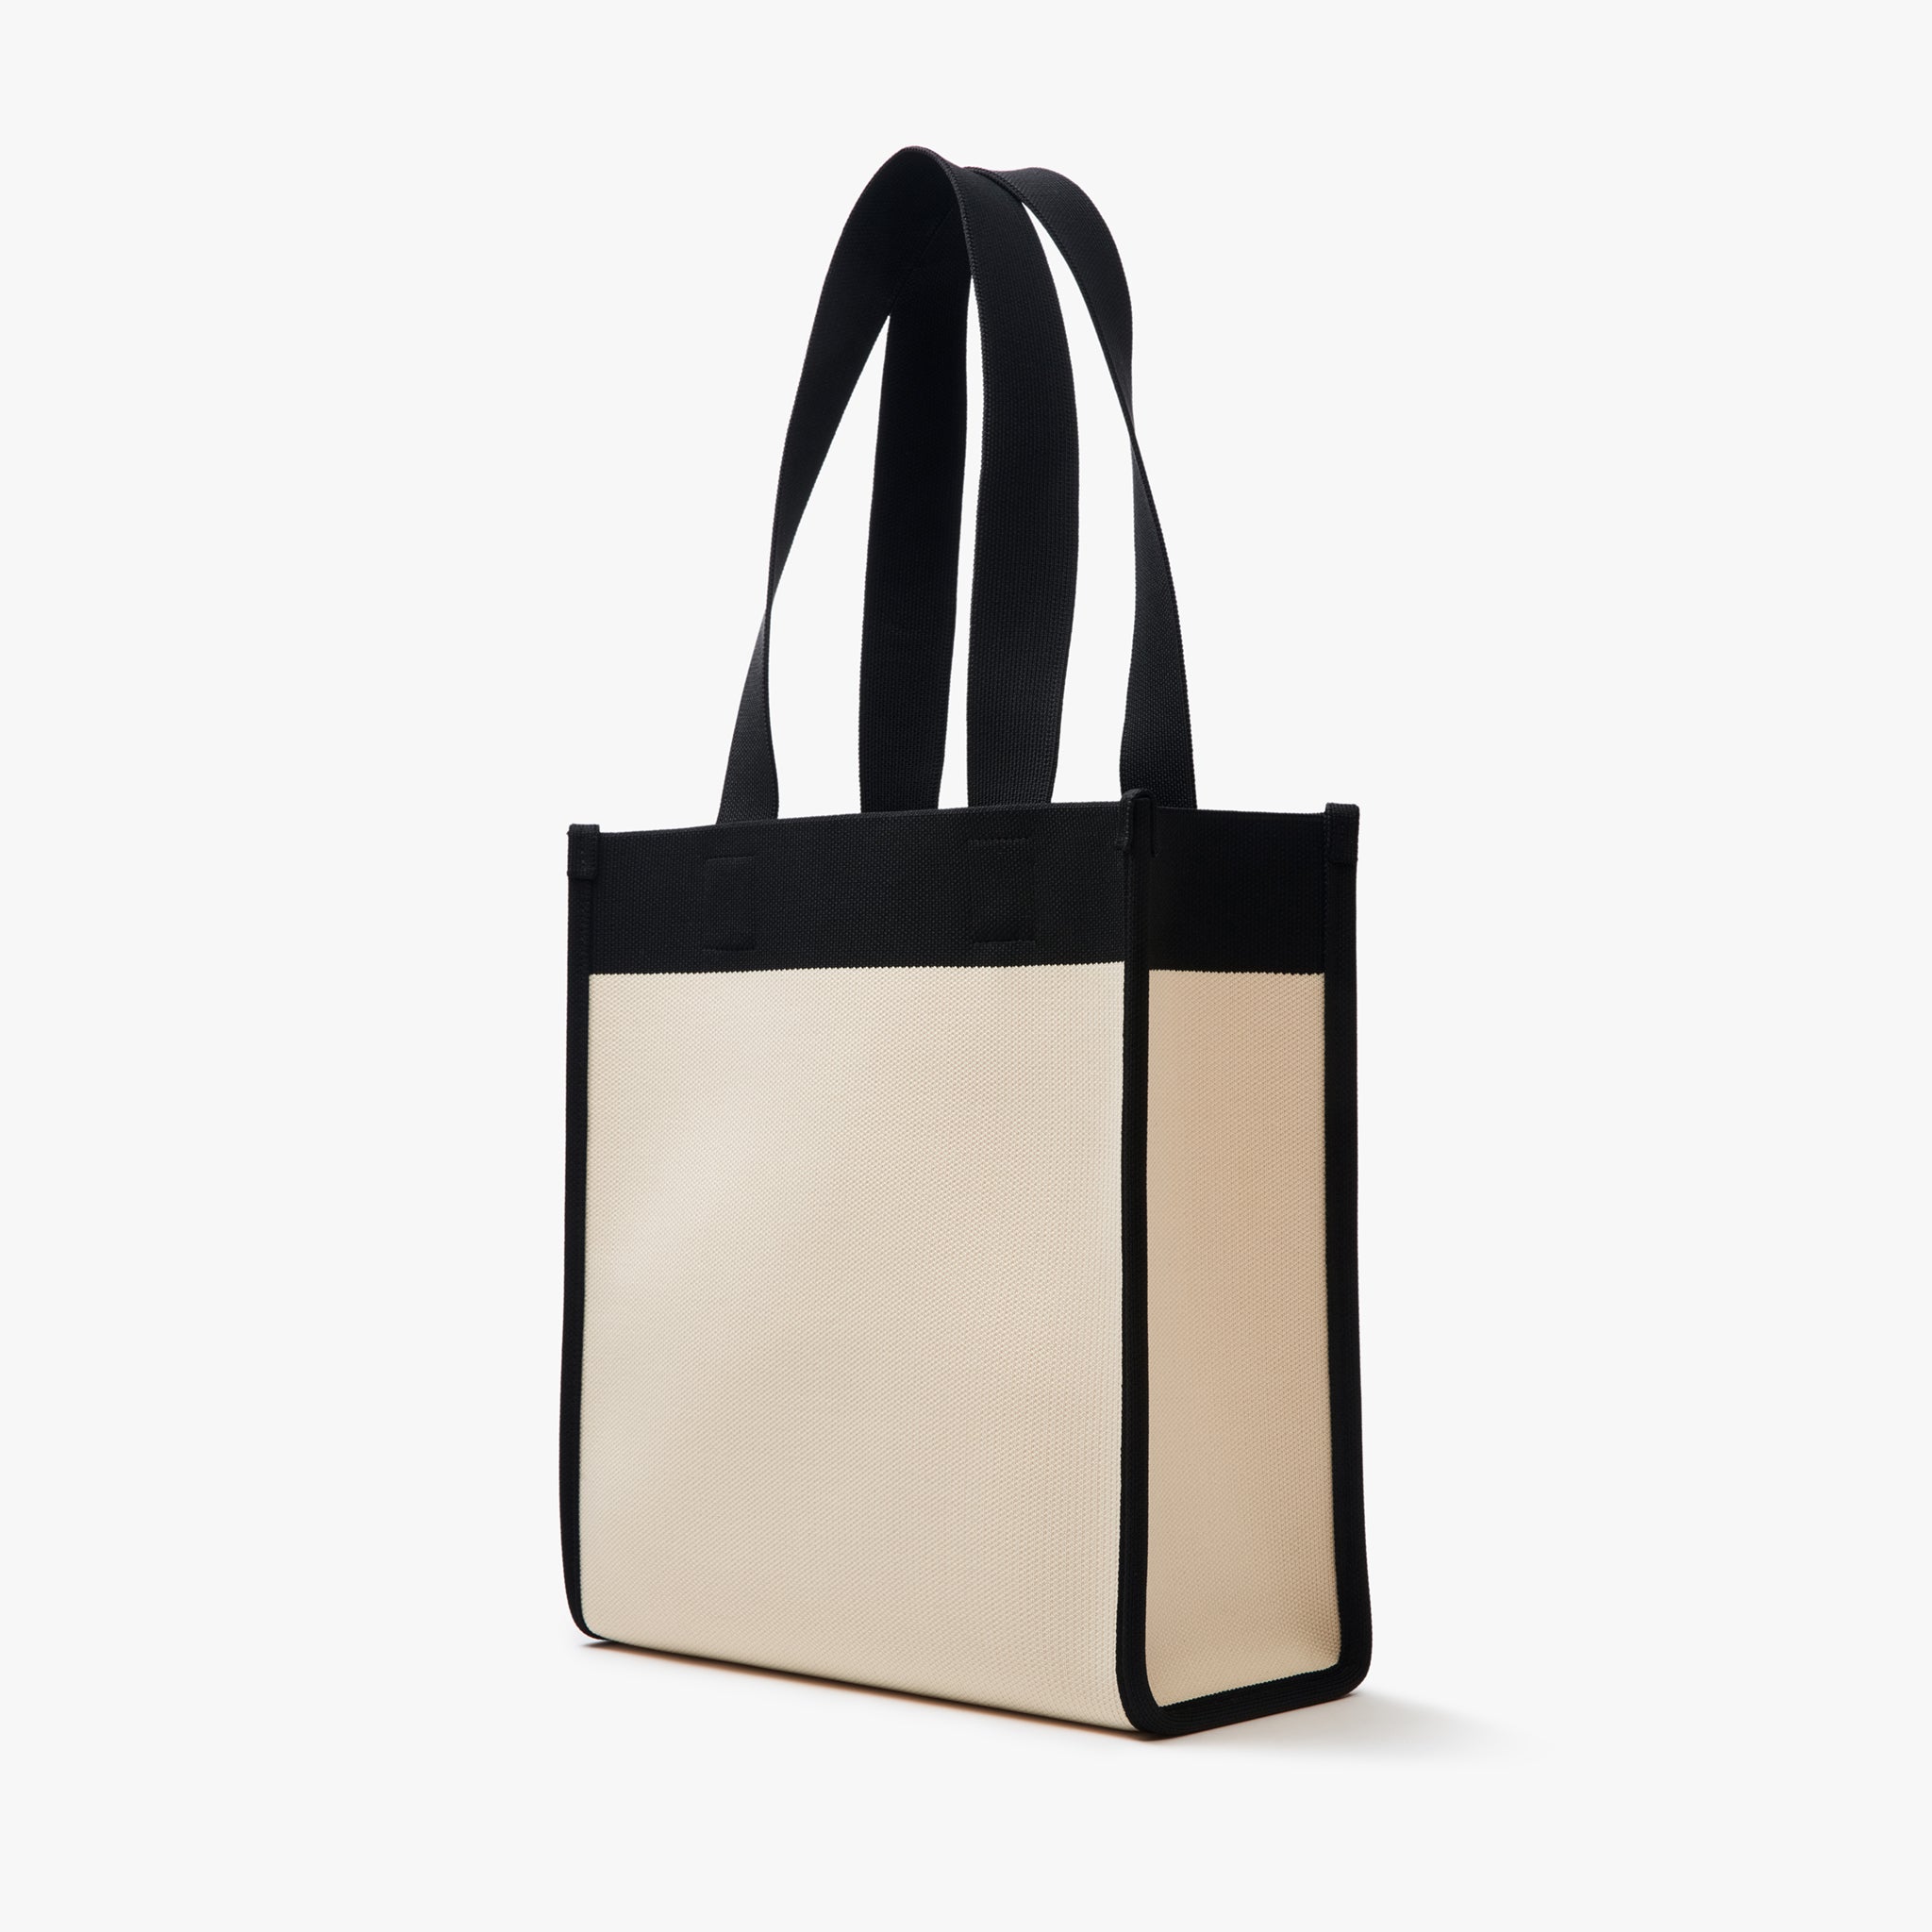 ANEW Tote Bag - Cream Black – ANOTHERSOLE | SG